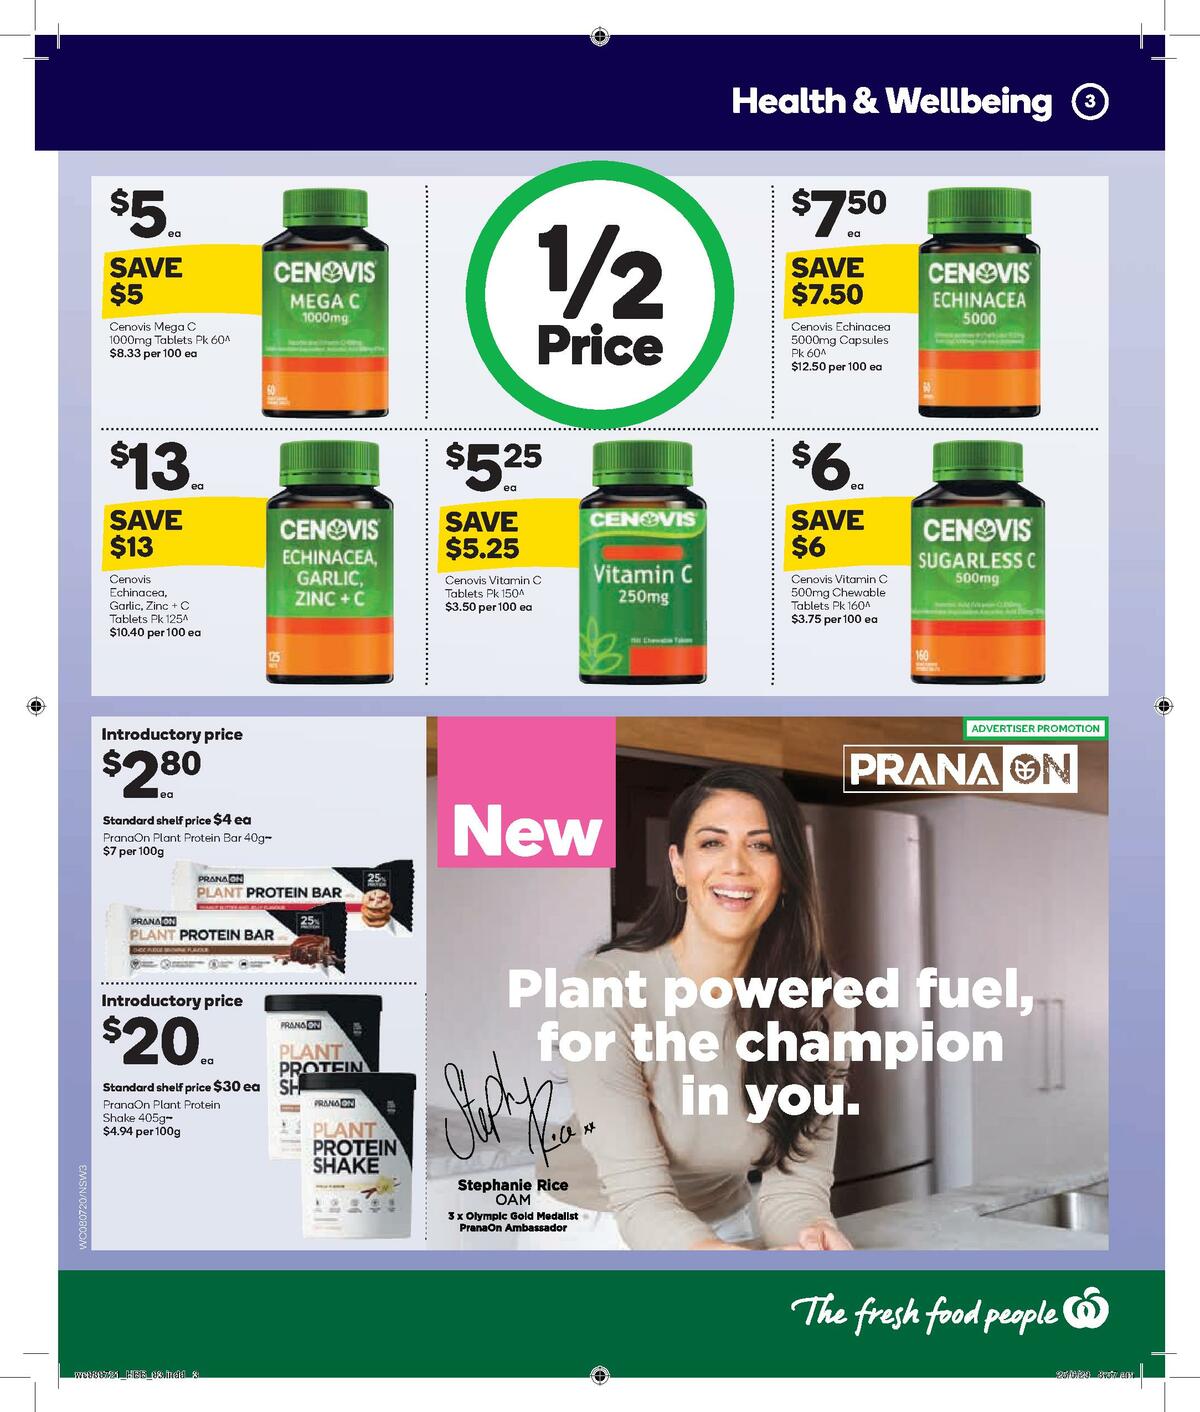 Woolworths Health & Beauty Catalogues from 8 July